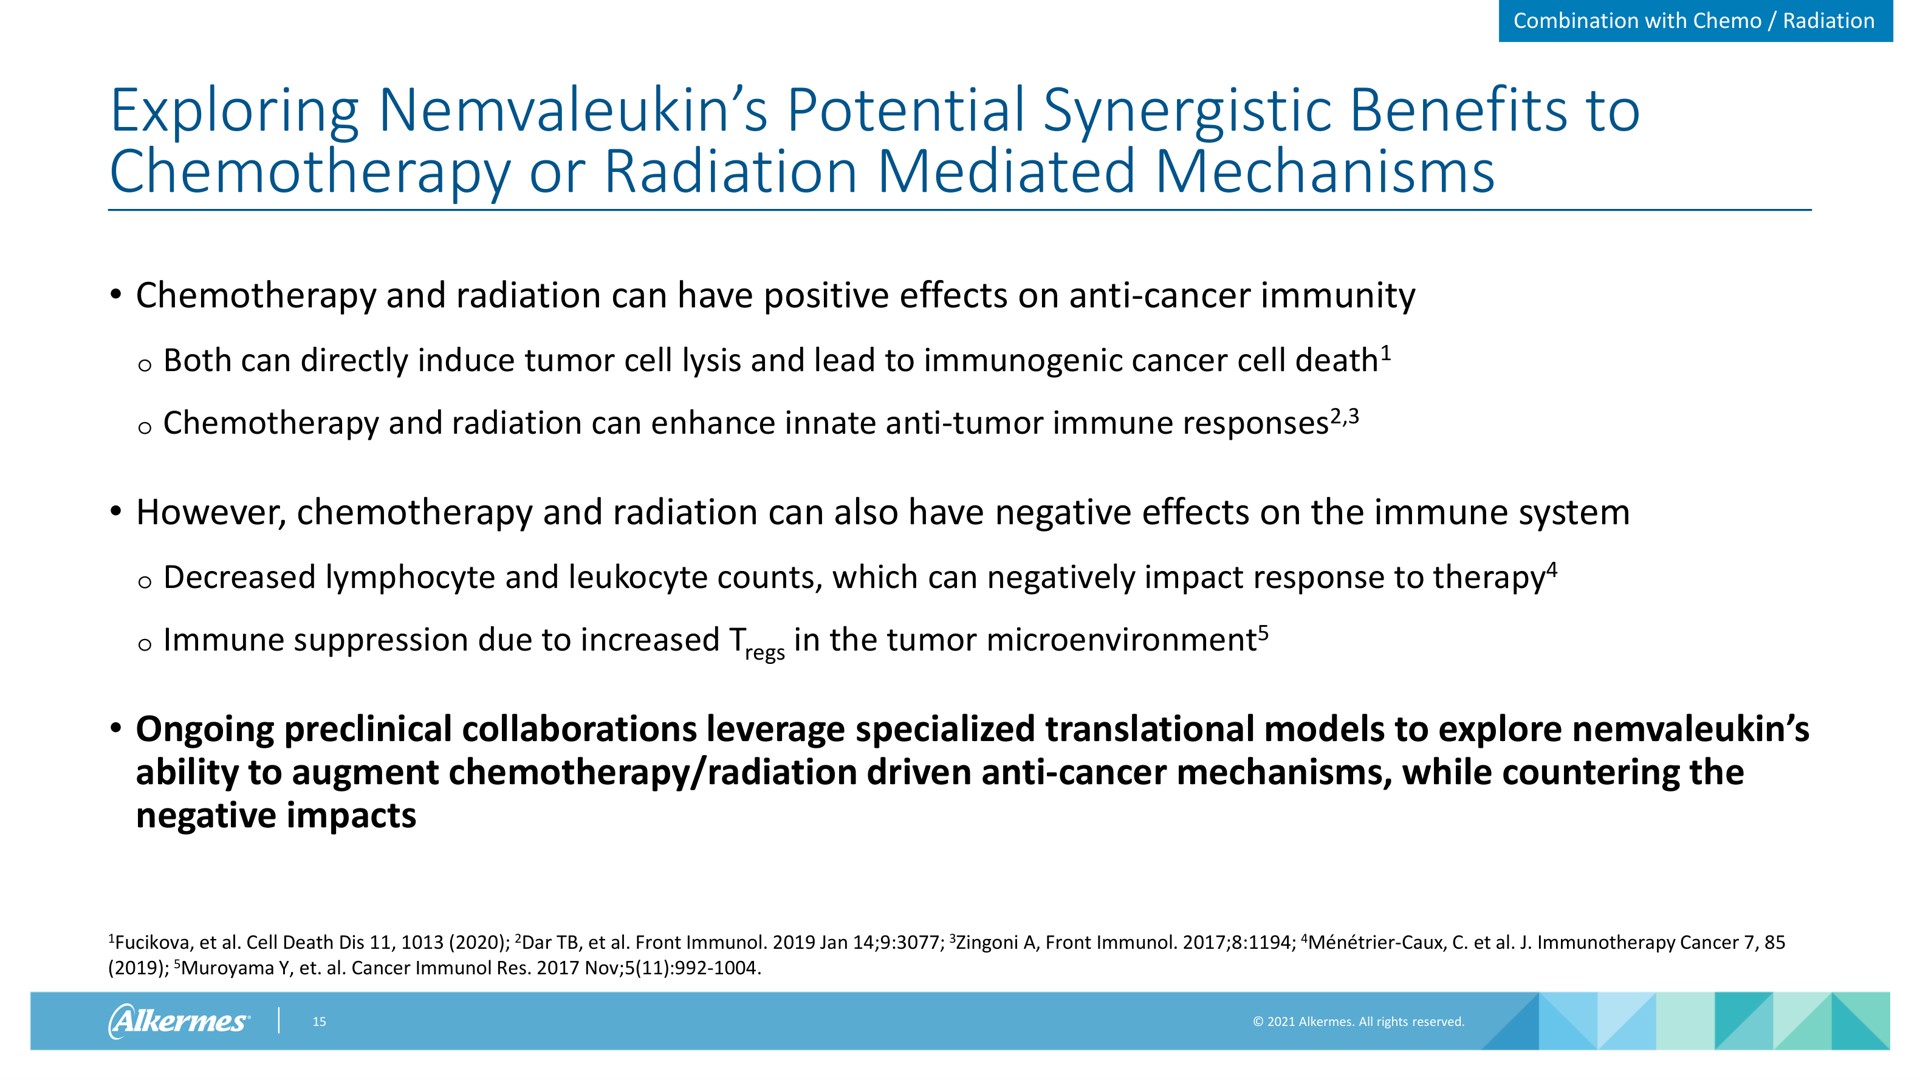 combination with radiation exploring potential synergistic benefits to chemotherapy or radiation mediated mechanisms chemotherapy and radiation can have positive effects on anti cancer immunity both can directly induce tumor cell lysis and lead to immunogenic cancer cell death chemotherapy and radiation can enhance innate anti tumor immune responses however chemotherapy and radiation can also have negative effects on the immune system decreased lymphocyte and counts which can negatively impact response to therapy immune suppression due to increased in the tumor ongoing preclinical collaborations leverage specialized translational models to explore ability to augment chemotherapy radiation driven anti cancer mechanisms while countering the negative impacts cell death dis dar front a front trier cancer cancer res responses therapy | Alkermes